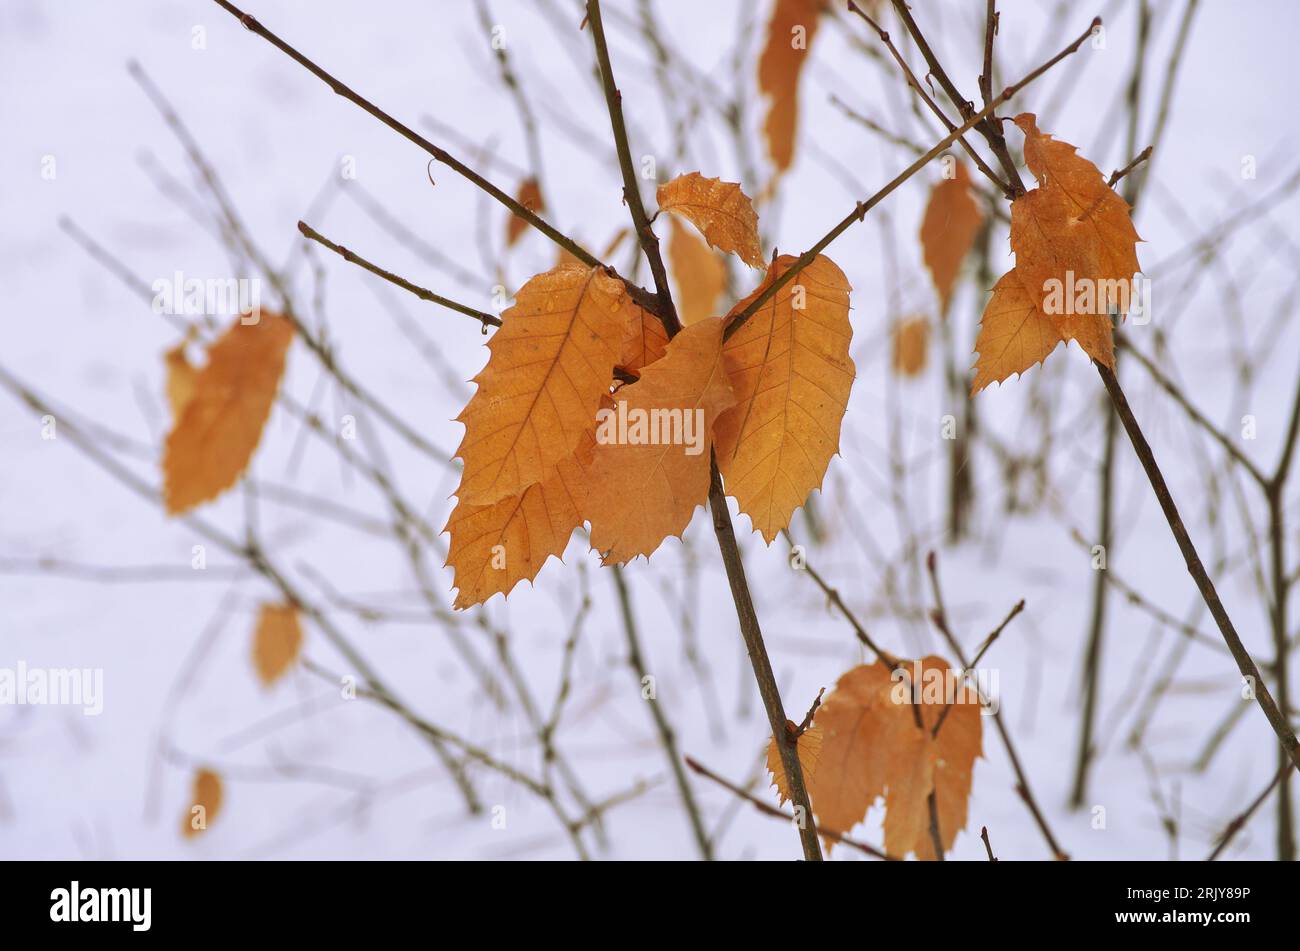 colour autumnal of chestnut leaves contrast with blurred white snowy background in Etna National Park, Sicily, Italy Stock Photo